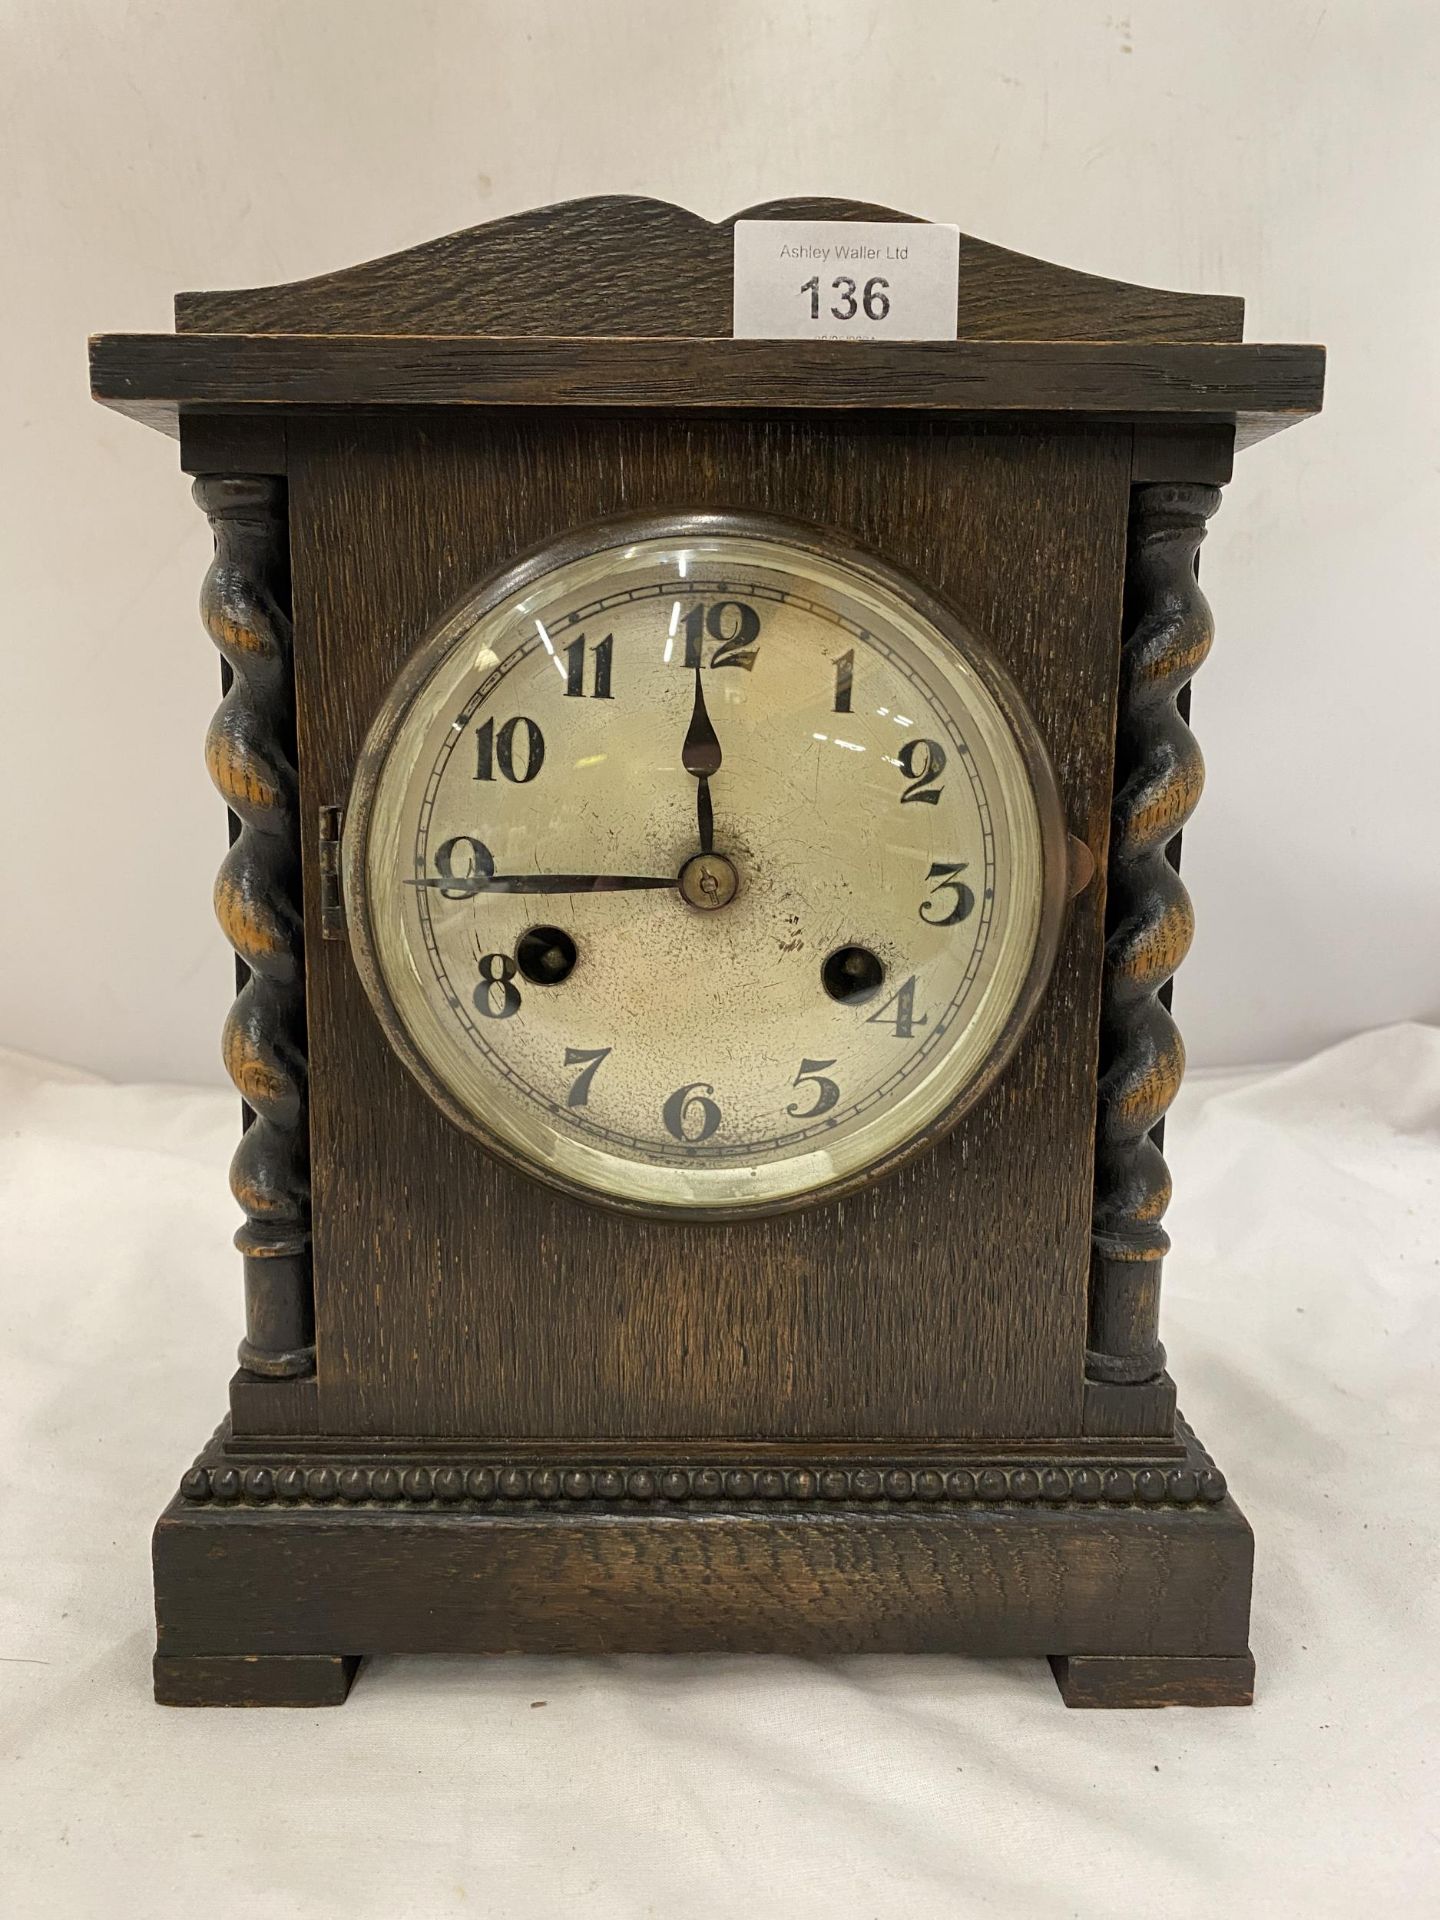 A WOODEN MANTLE CLOCK WITH BARLEY TWIST DESIGN